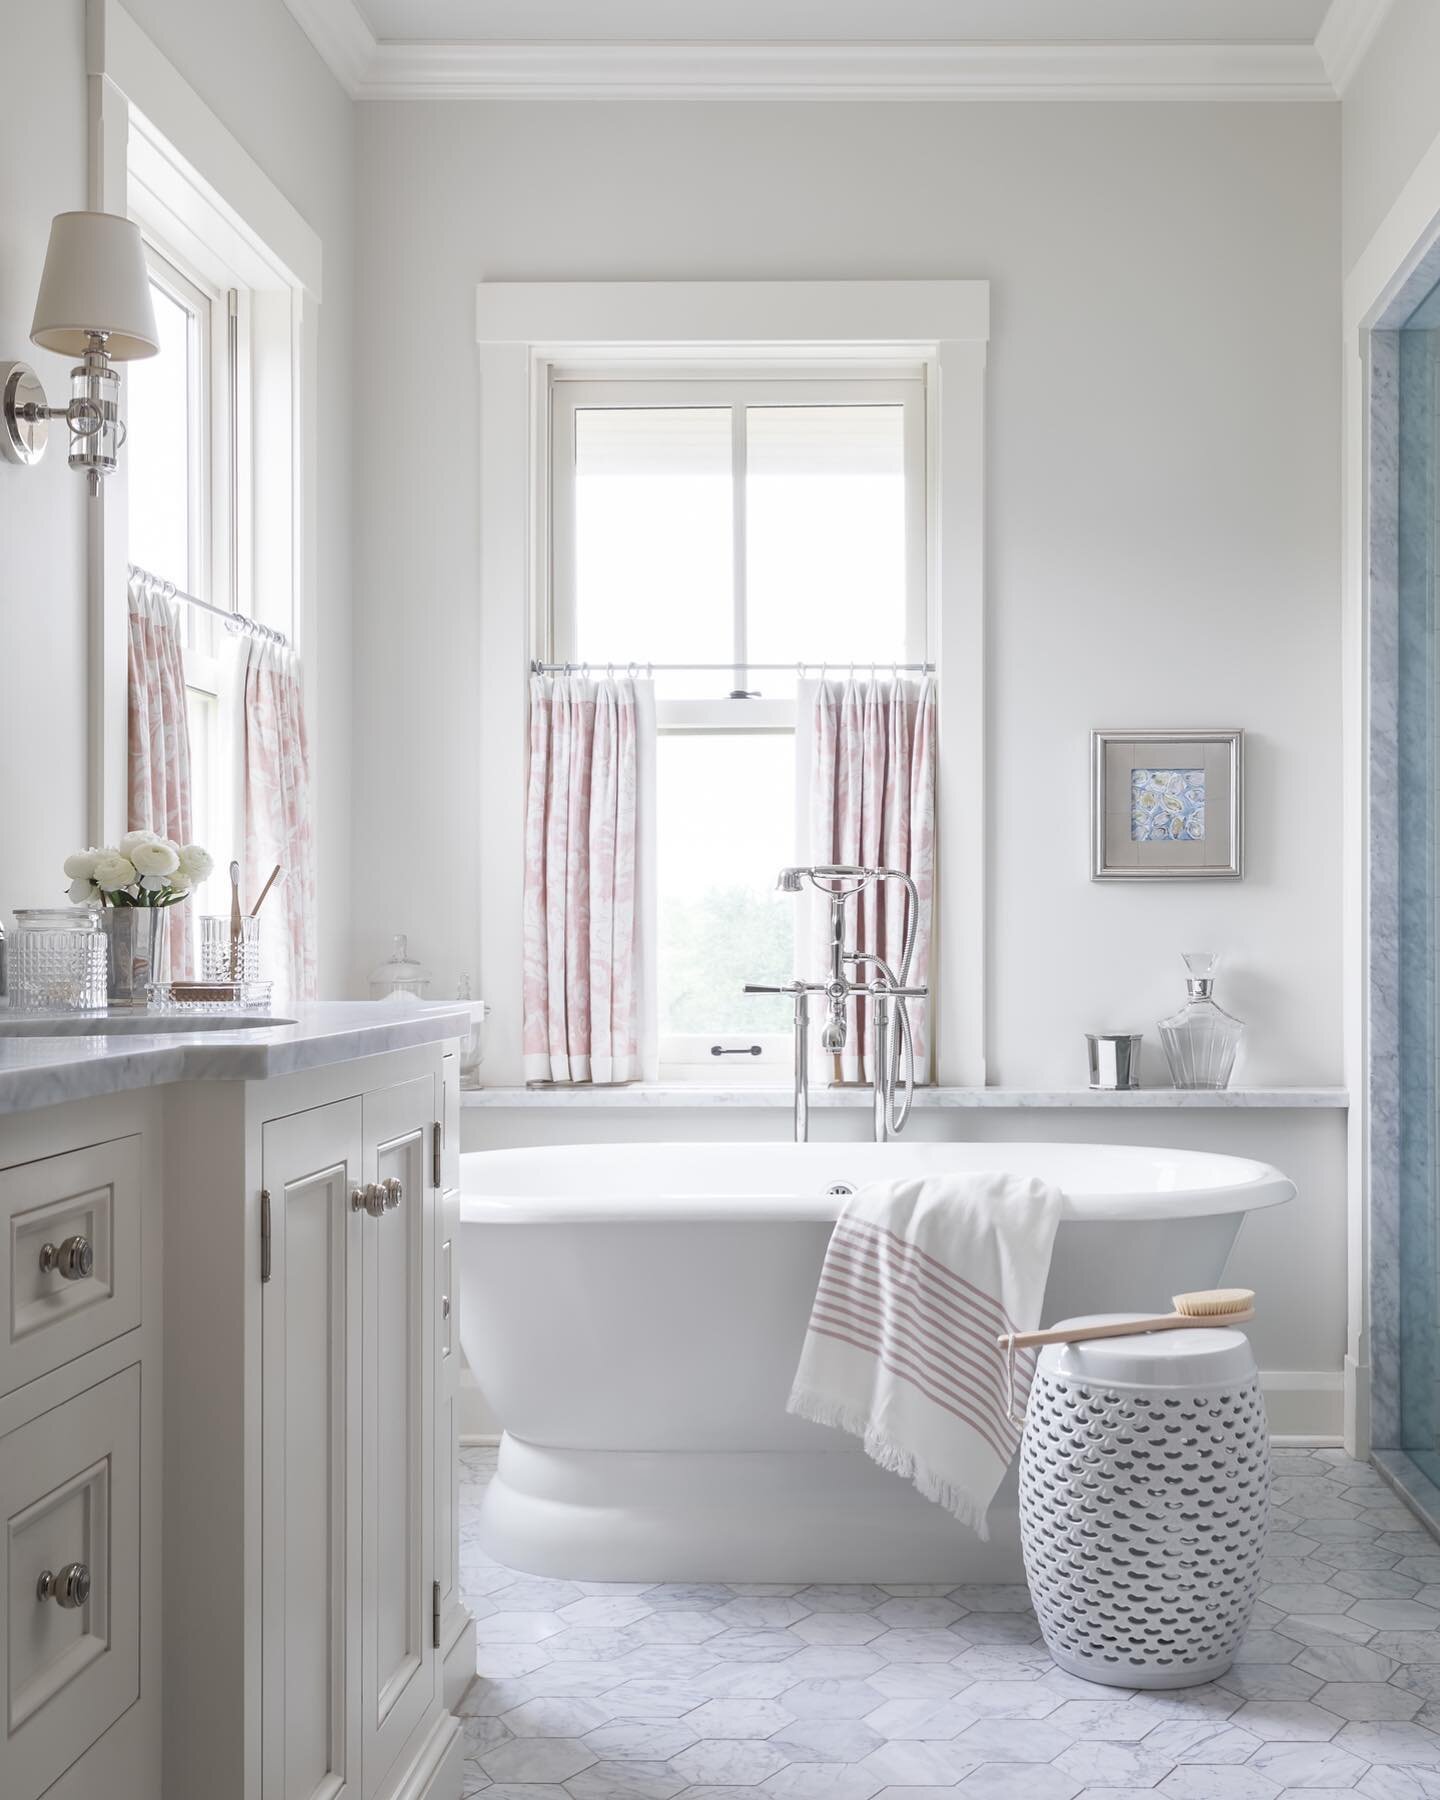 Happy Valentine&rsquo;s Day 💕hope everyone in the Midwest is staying warm! With a high of 3 today, this spot looks like a nice retreat for some self care. #anniekerninteriors Photo by: @natesheetsphoto